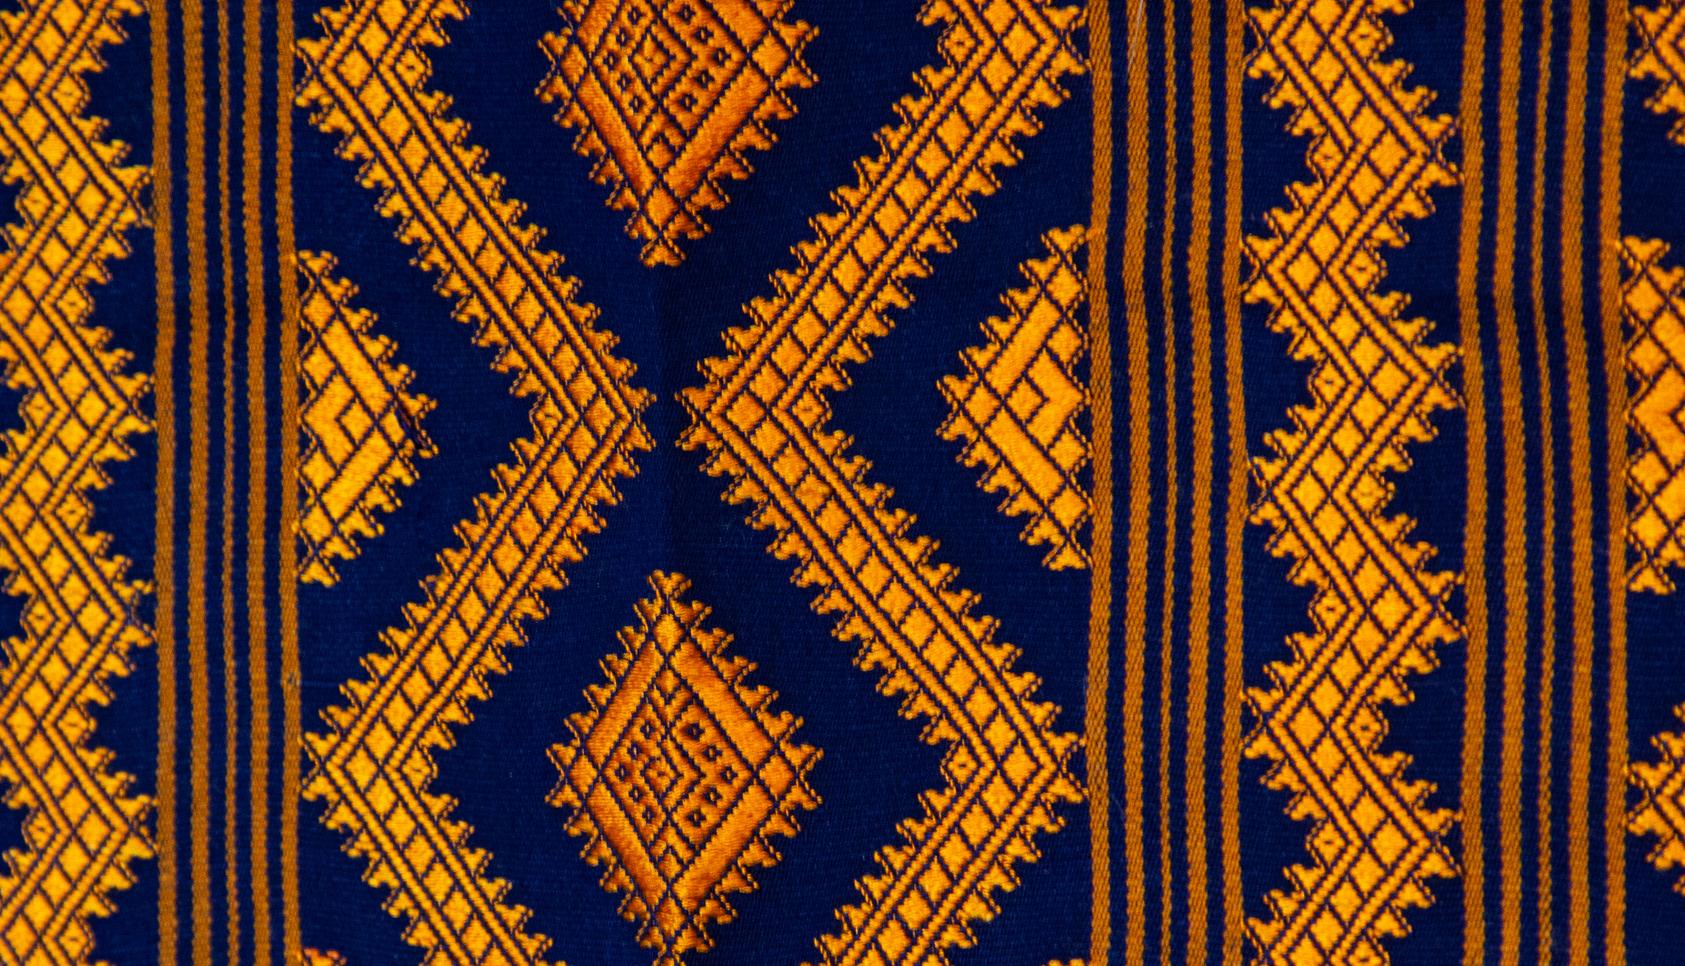 Bhutanese silk woven kira textile, purple. From the royal weavers of Bhutan, this kira textile is a rectangular weaving worn as an ankle length dress by Bhutanese women. This example was originally woven for Her Majesty Gyalyum (Queen Mother) Sangay